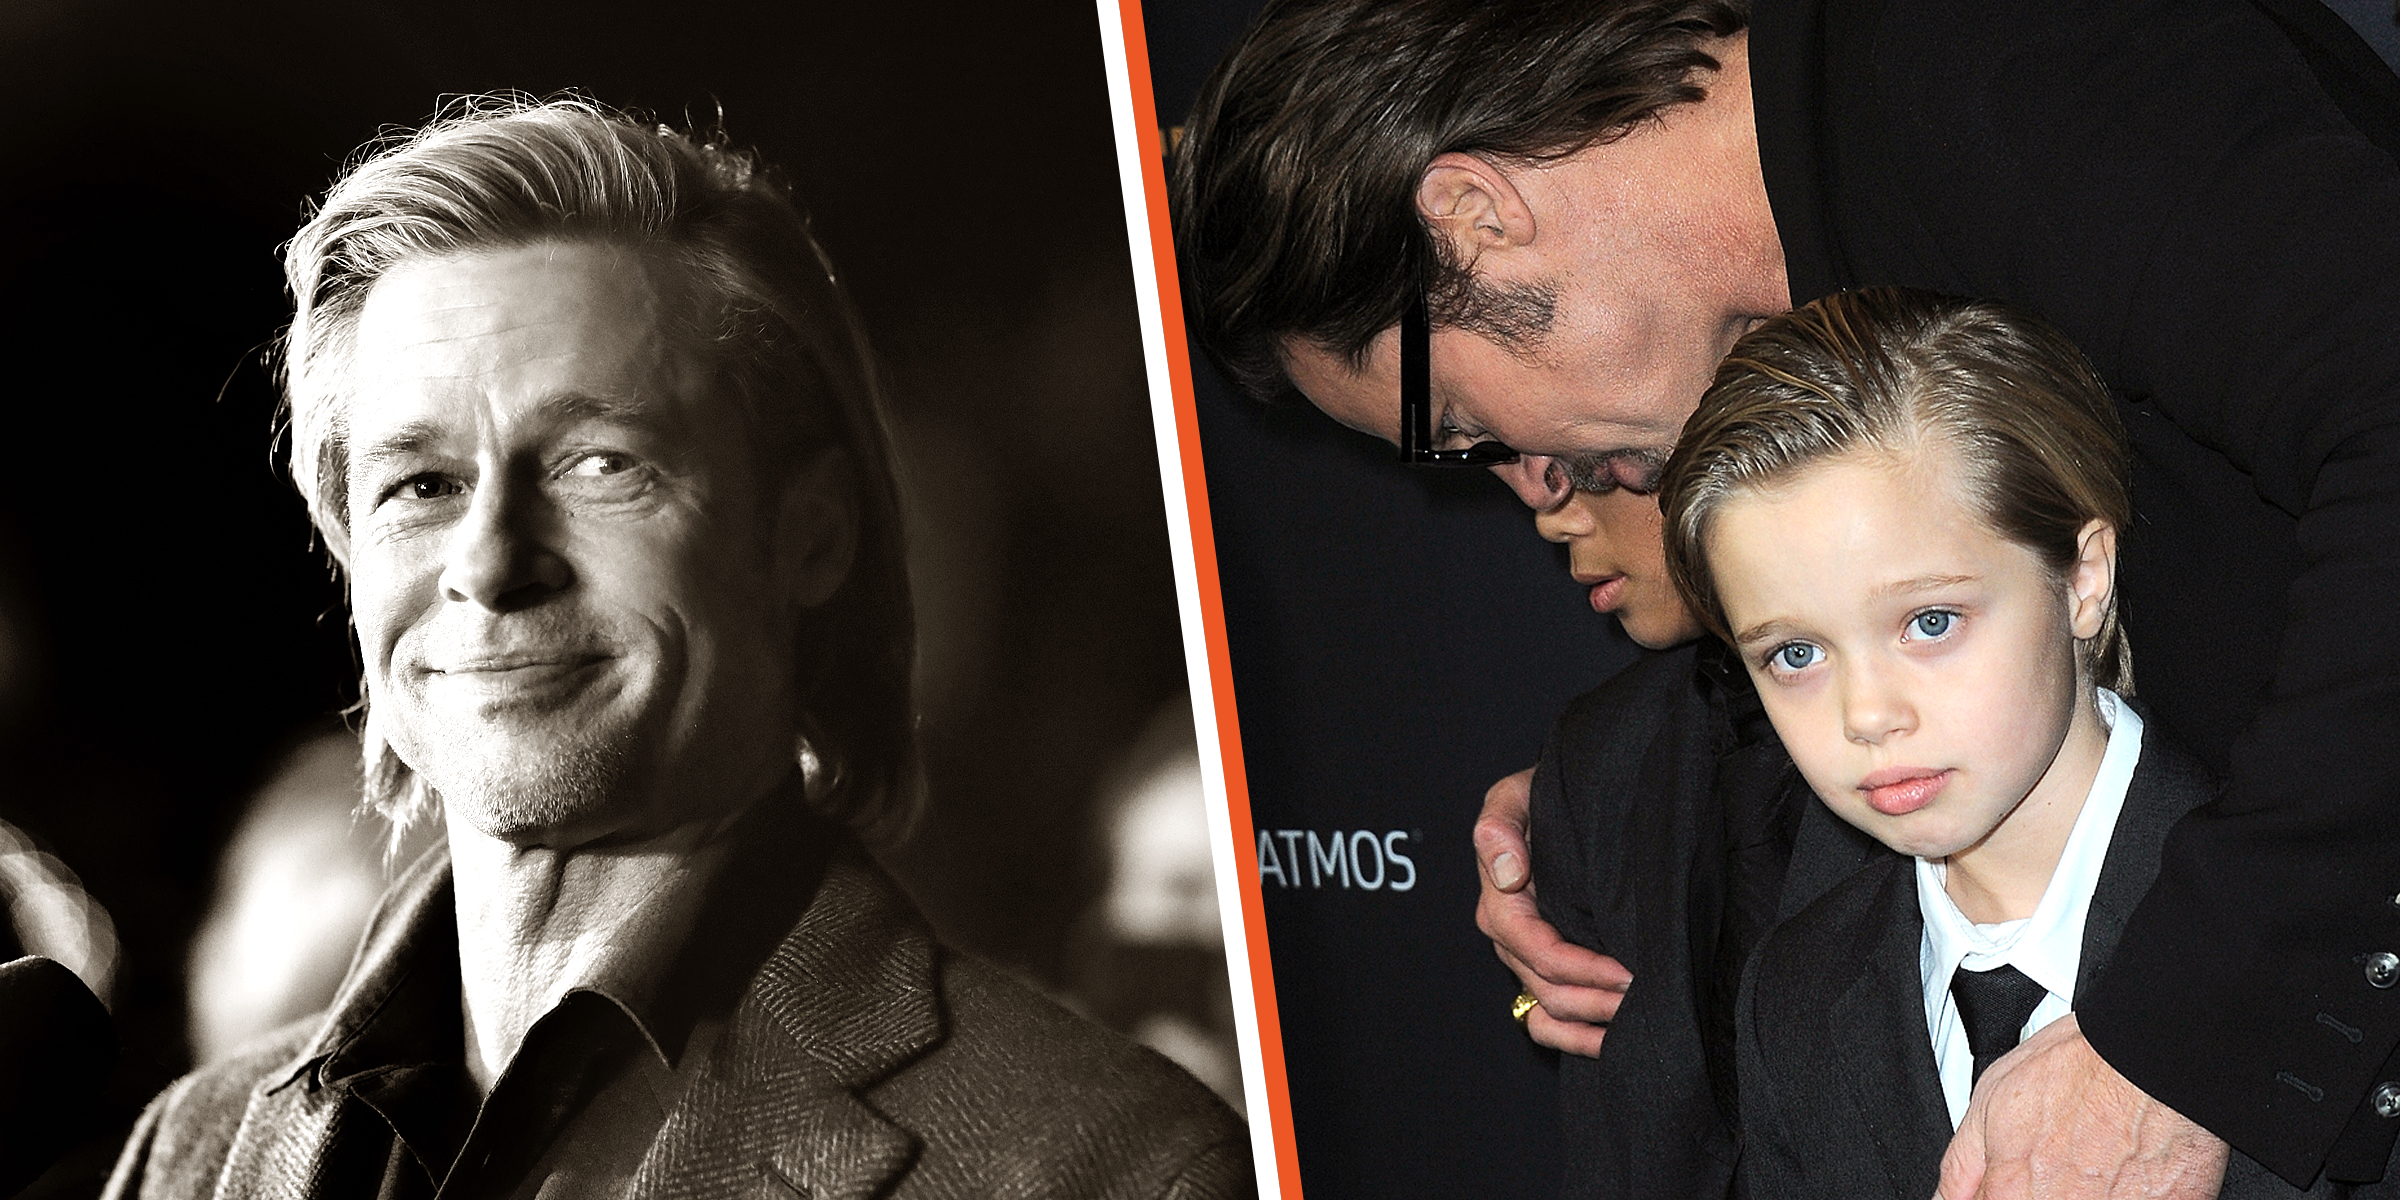 Brad Pitt | Brad Pitt and his children Shiloh and Pax | Source: Getty Images